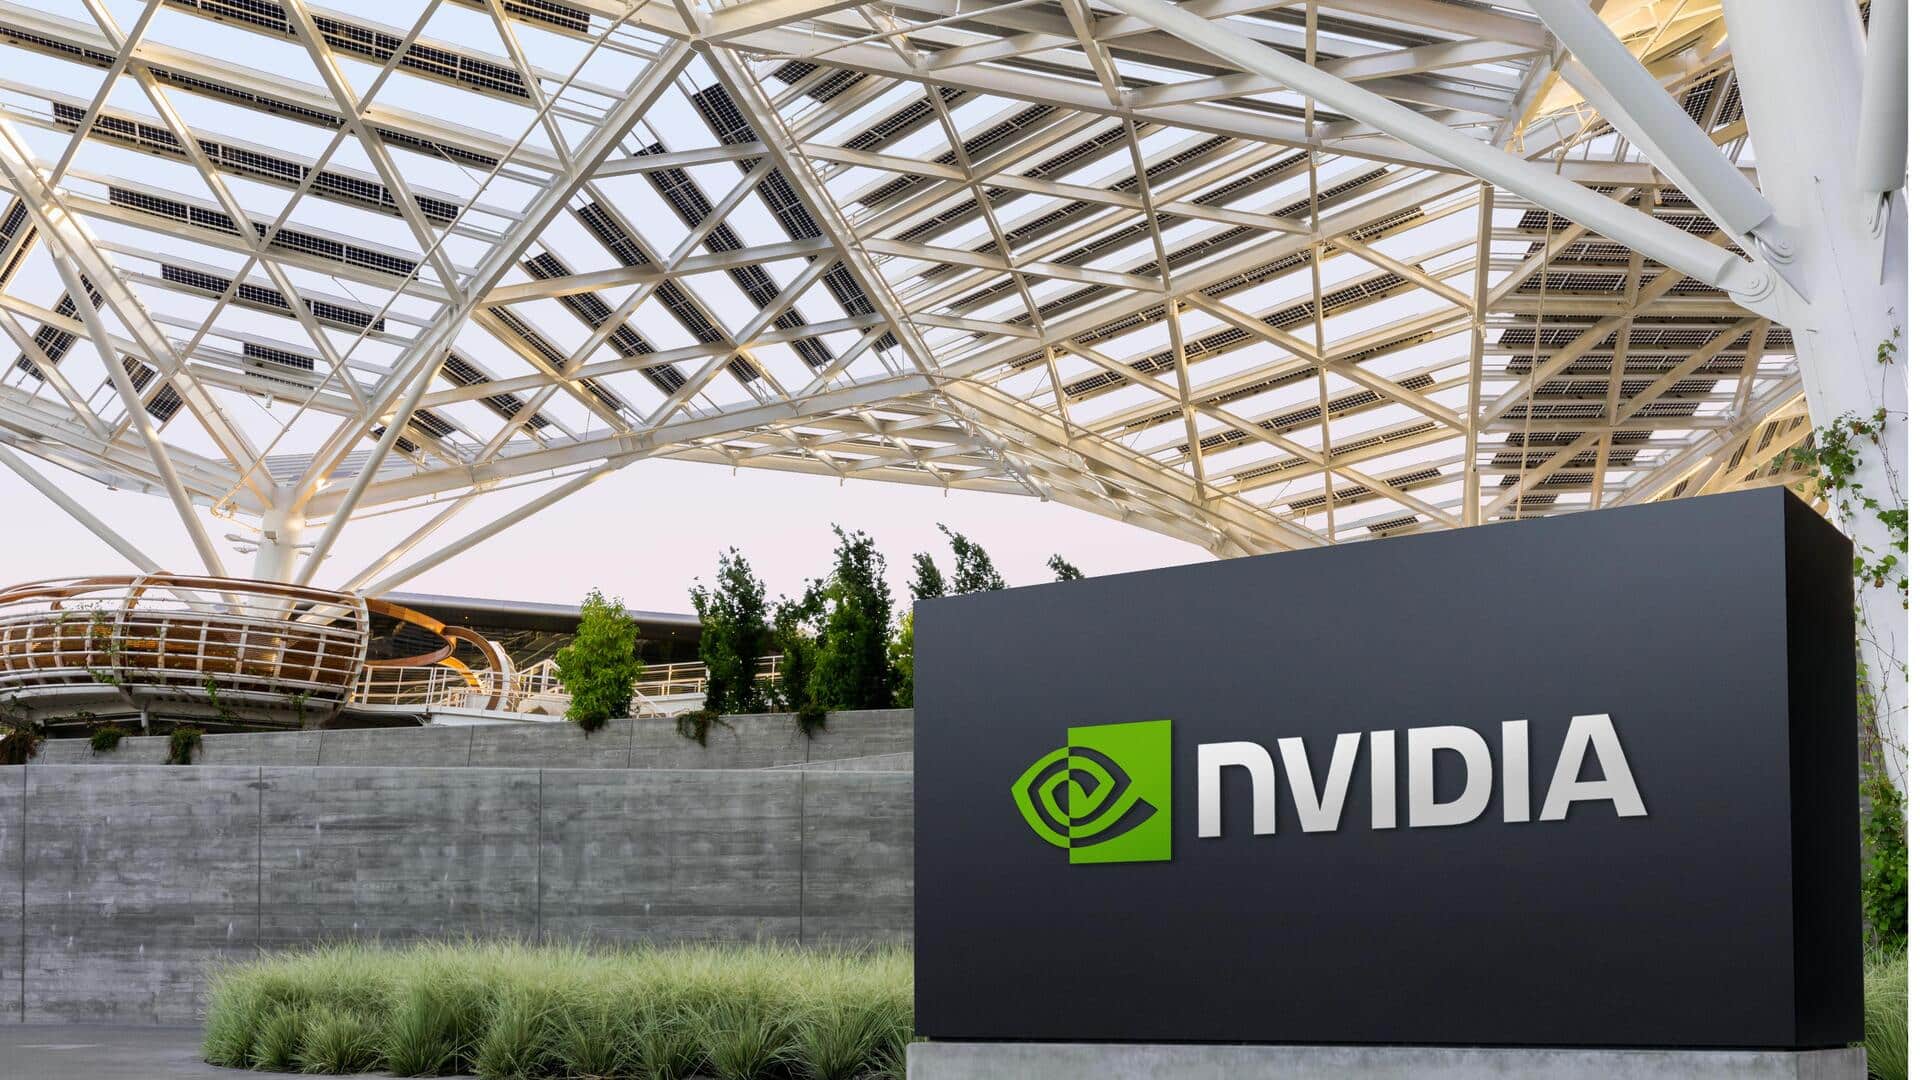 NVIDIA faces lawsuit for using copyrighted books for training AI